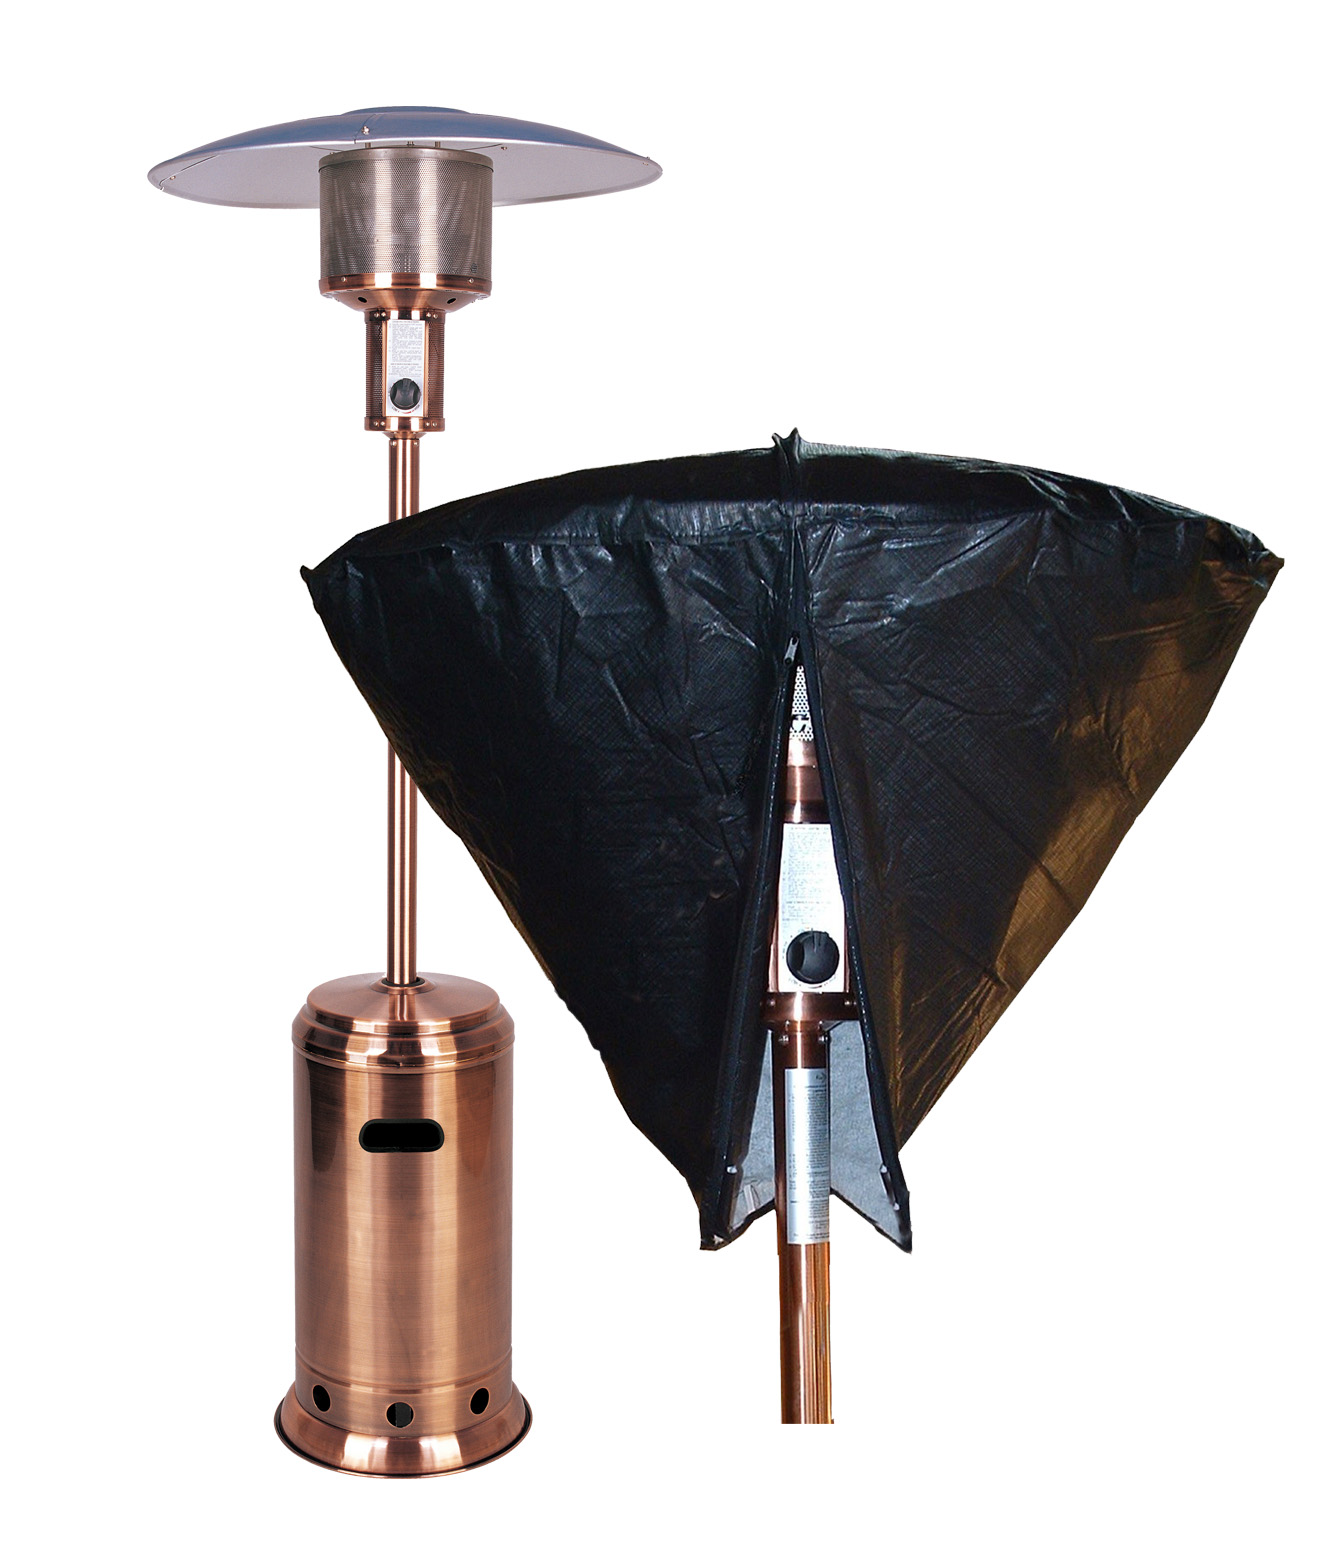 Image of Paramount Black Outdoor Patio Heater Head Cover